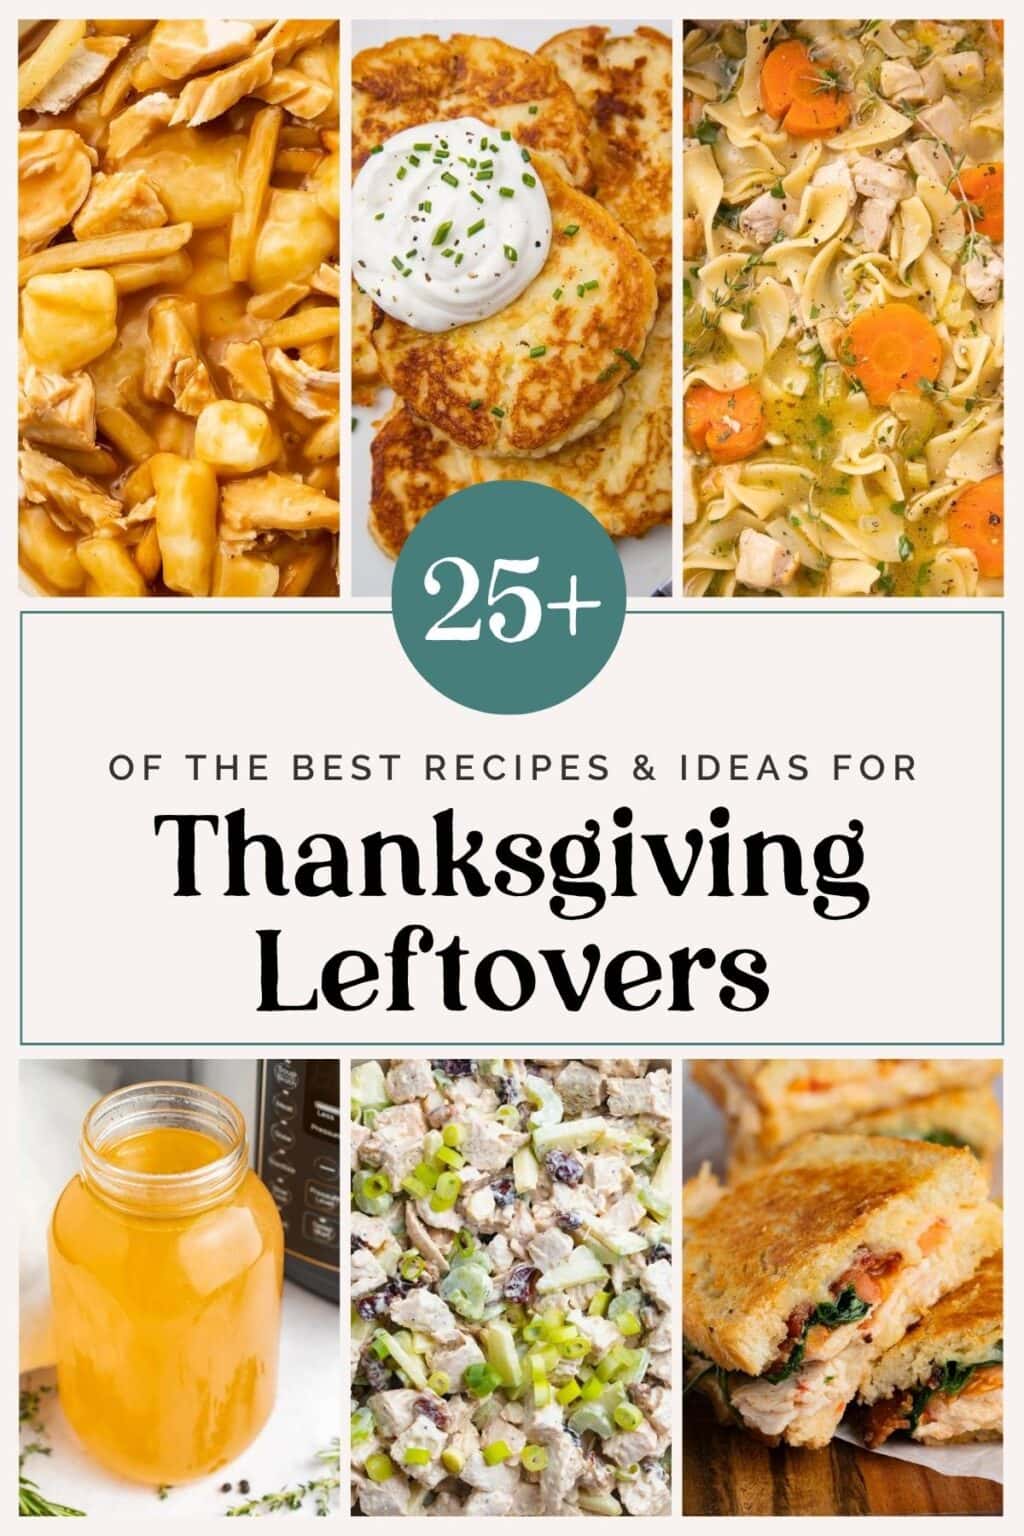 25+ of the Best Thanksgiving Leftovers Recipes & Ideas - 40 Aprons